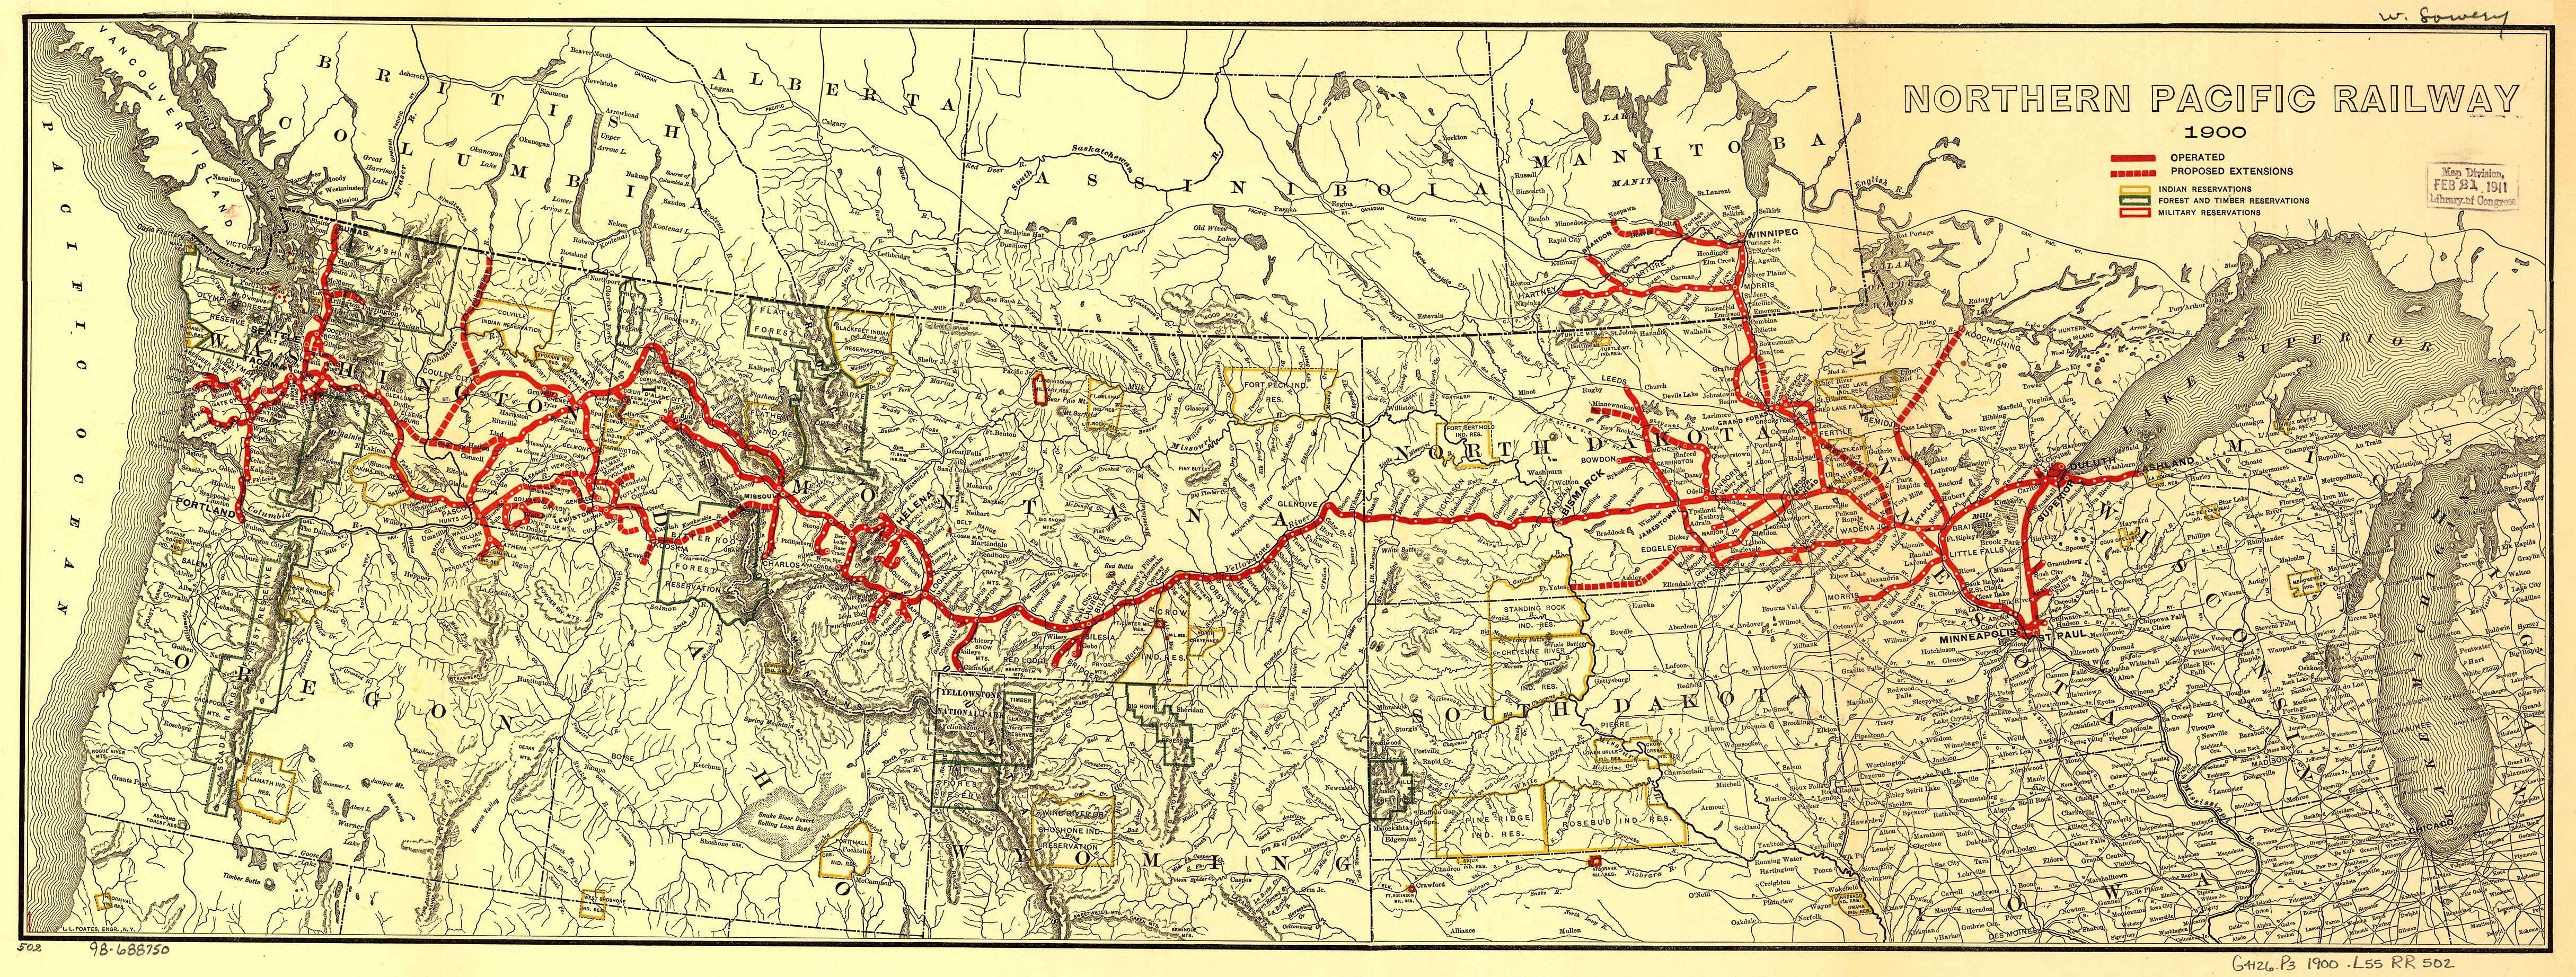 Rail arrived in northeast Montana in 1887. Shown in this 1900 map are the Northern Pacific and Great Northern railways. In 1886-8 Wood, Jr. and his son George H. Wood witnessed signing of an agreement between native tribal leaders and the US government which resulted in re-drawing Fork Peck Reservation boundaries in exchange for federal subsidies.   Wood left Montana in 1889, the year Montana became a US State.